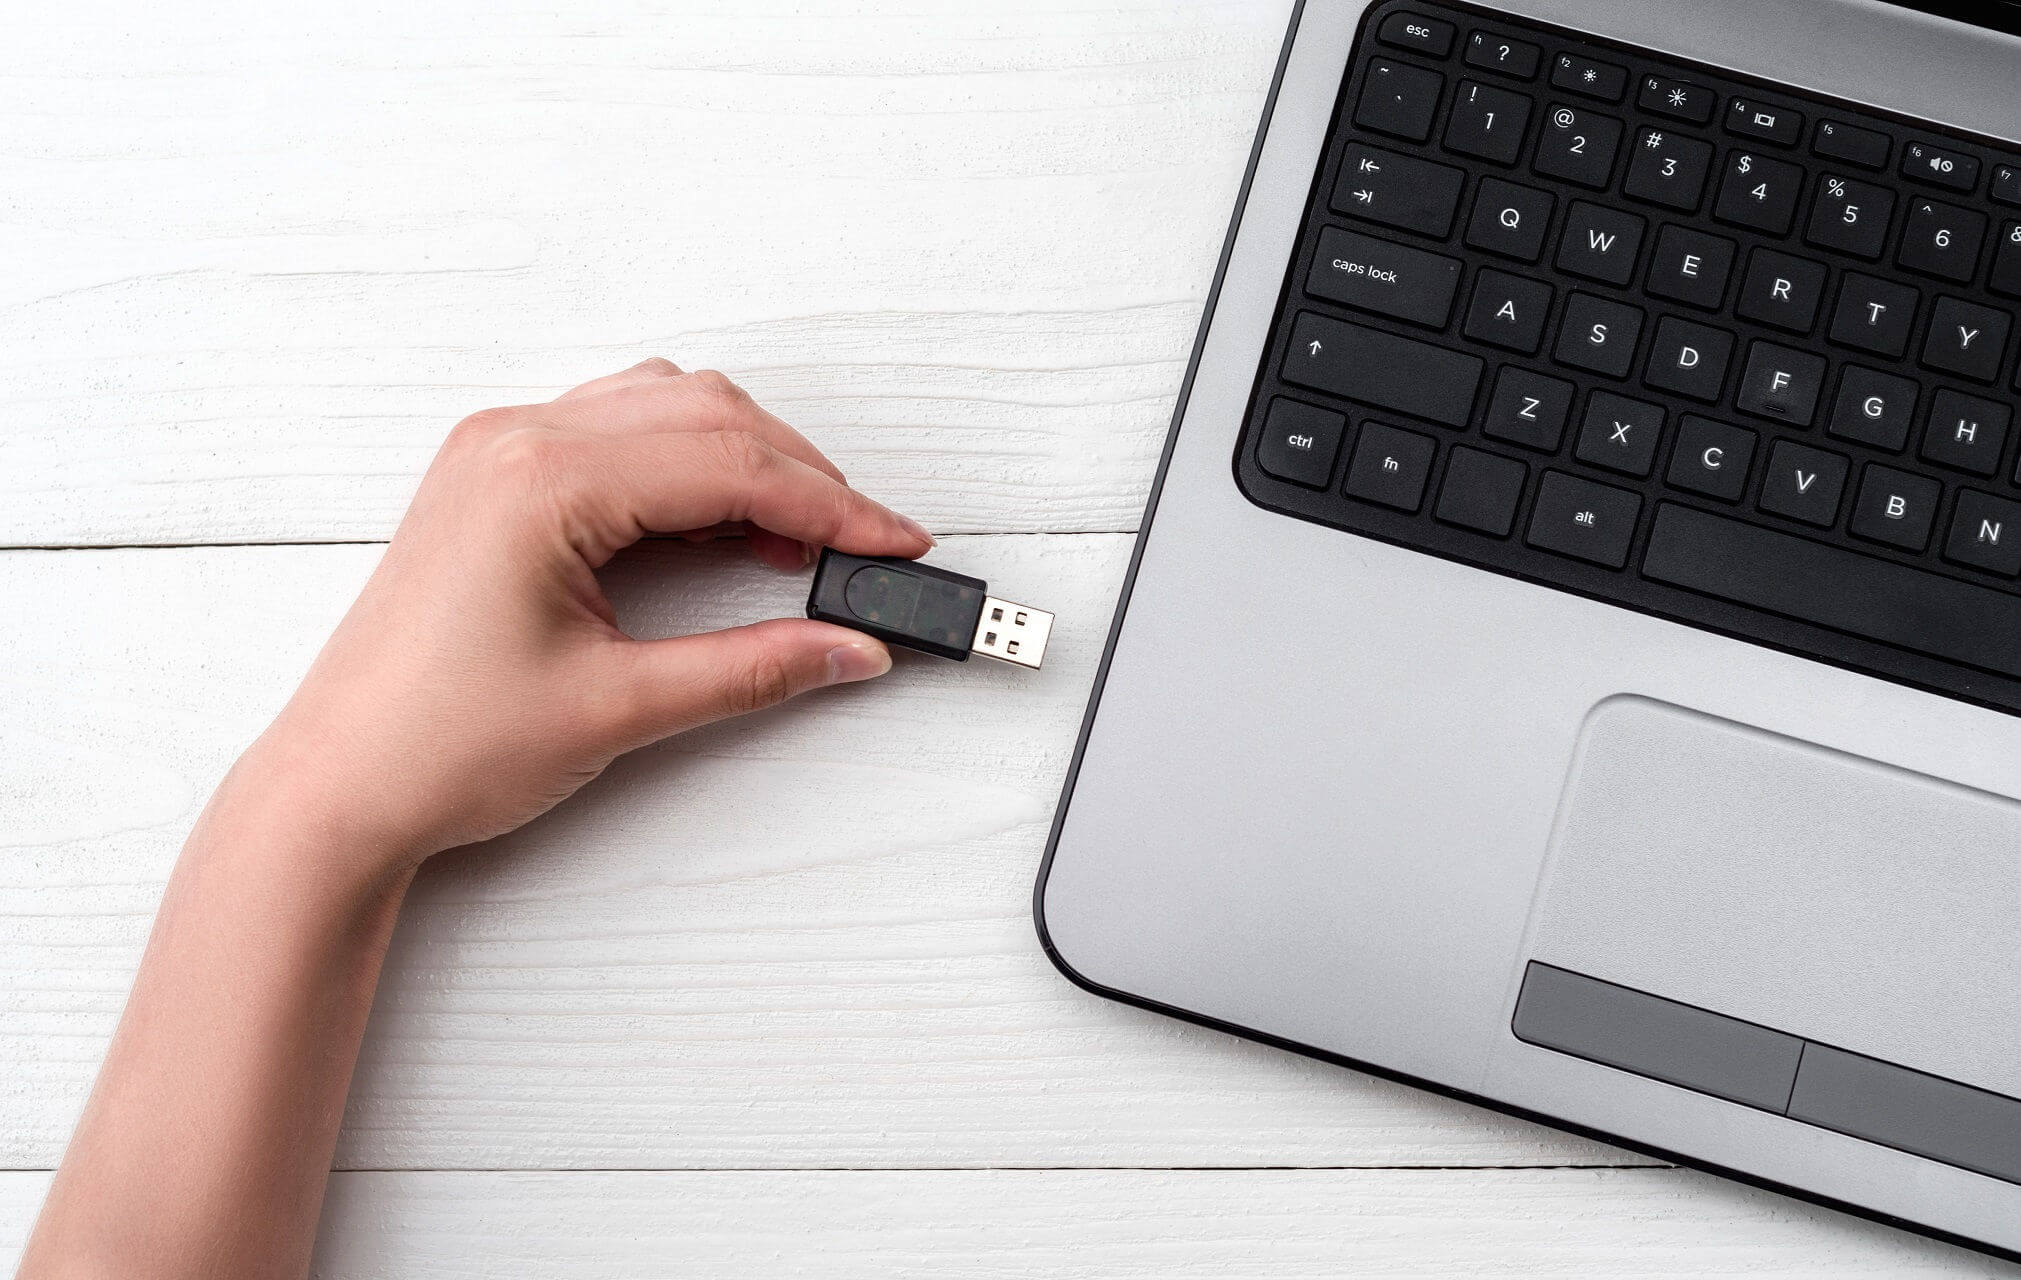 How to Recover Deleted Files from USB Flash Drive? [2022]